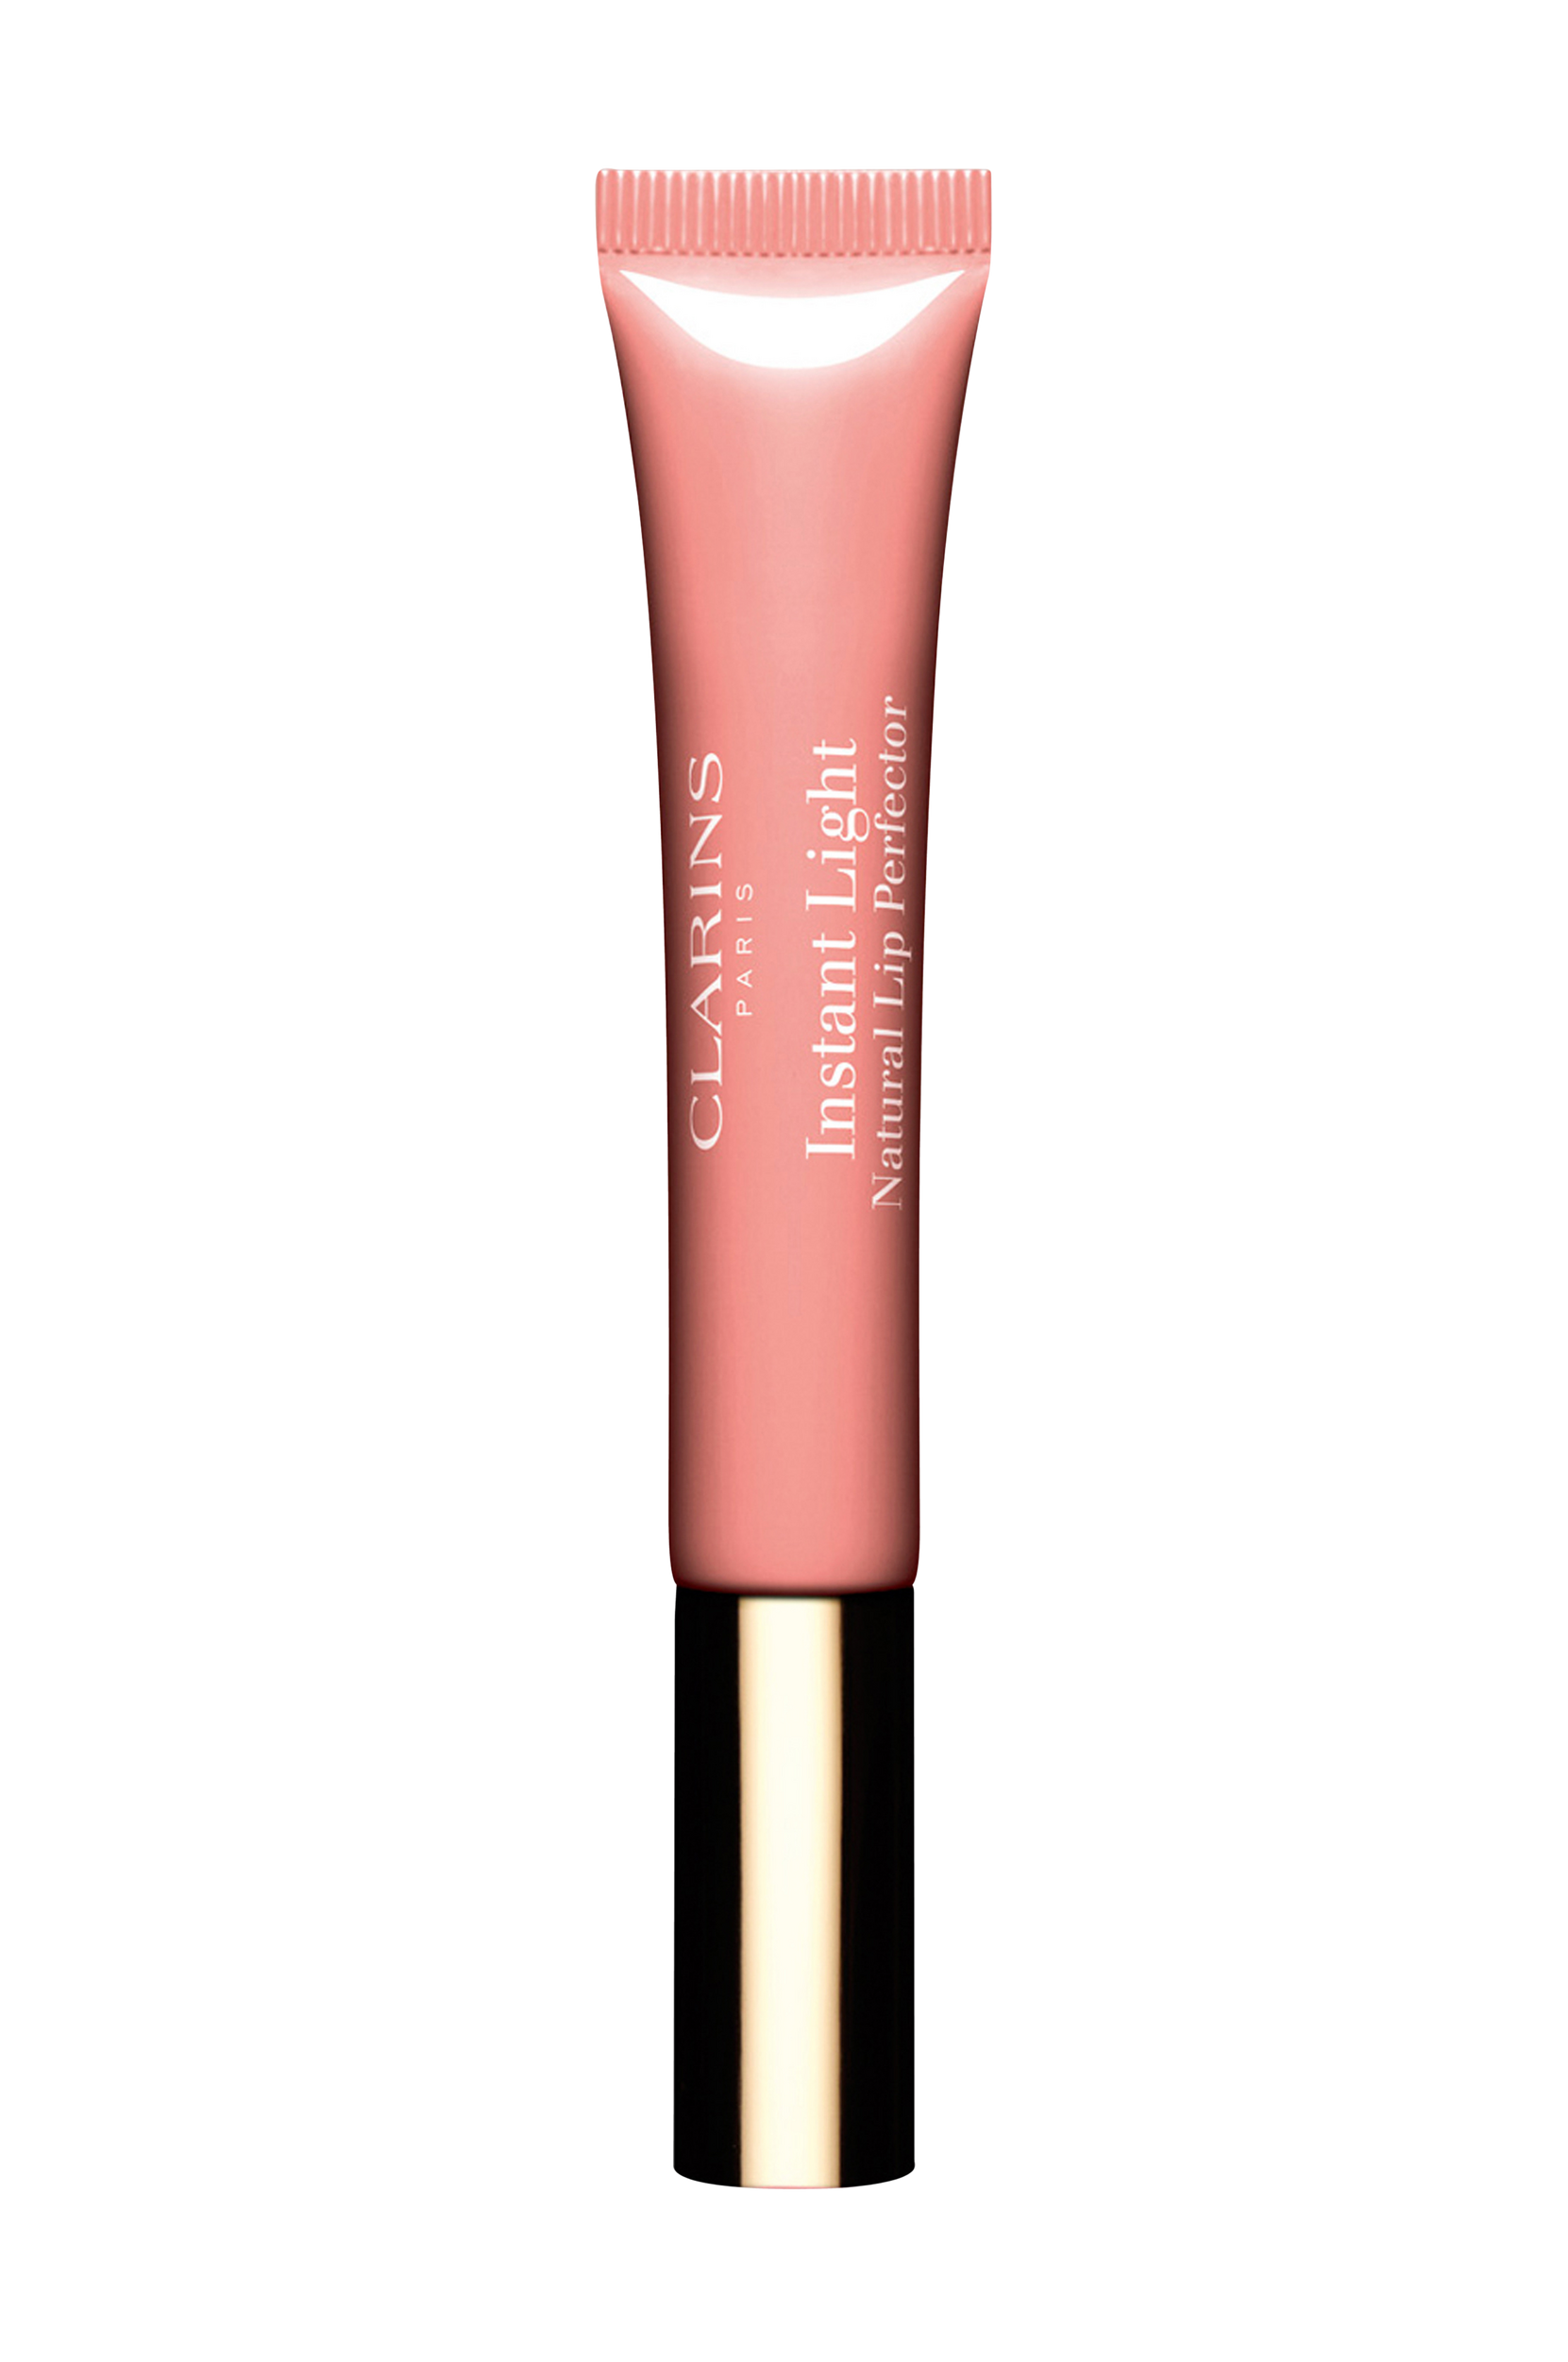 Instant Light Natural Lip Perfector 12 ml, Clarins